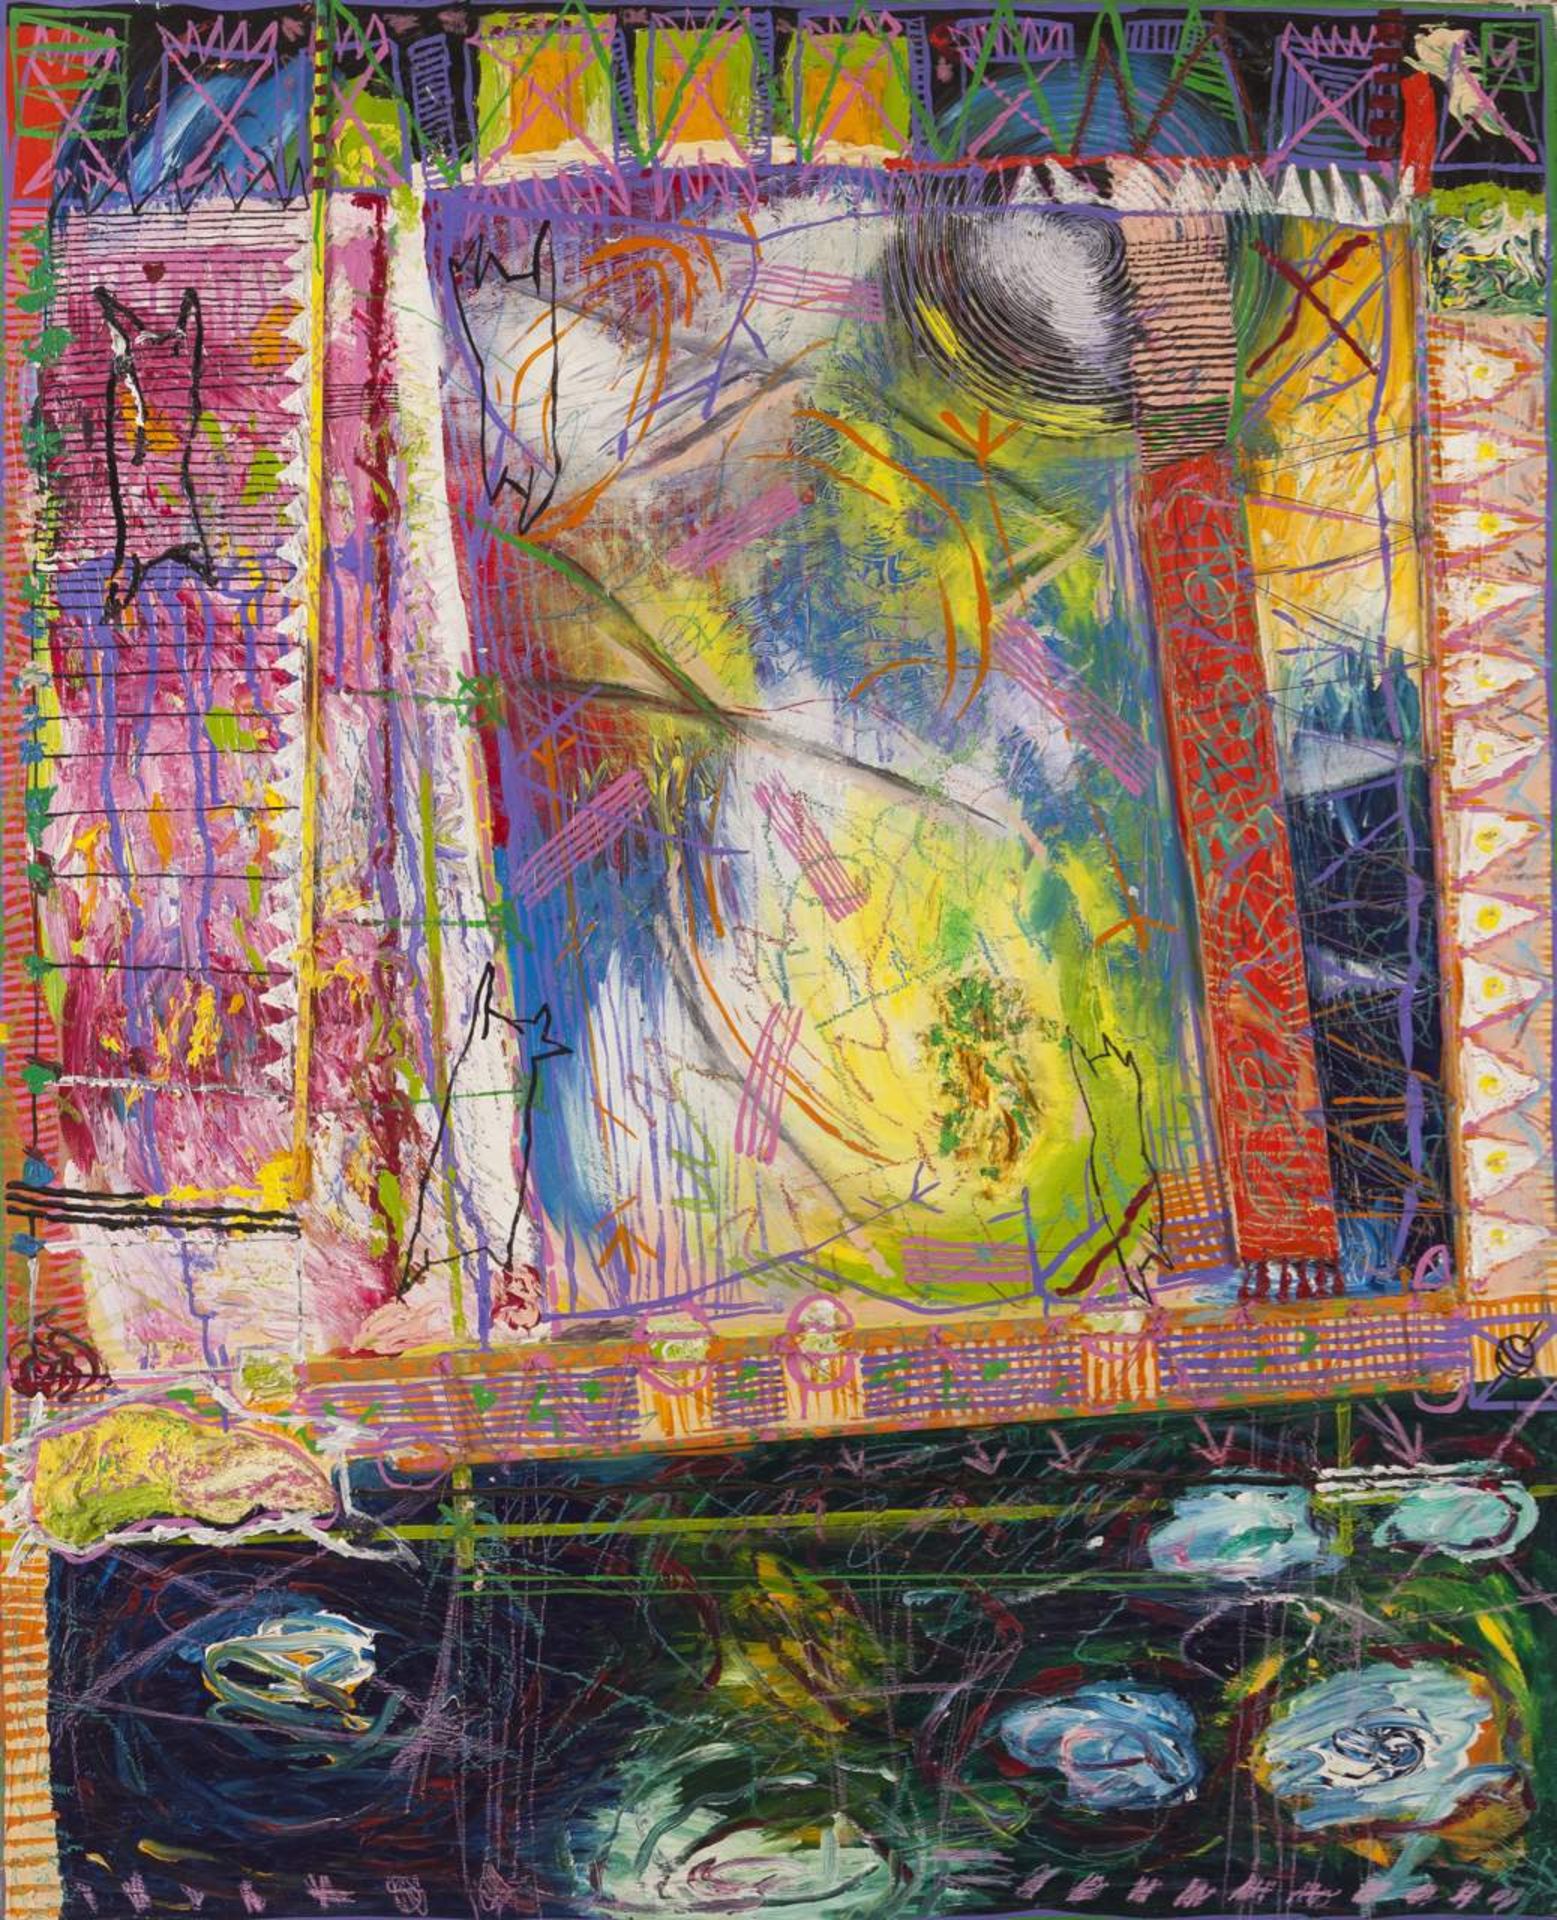 Ana Vidigal (b. 1960)
Untitled
Mixed media on canvas
Signed and dated 1986

160x130 cm